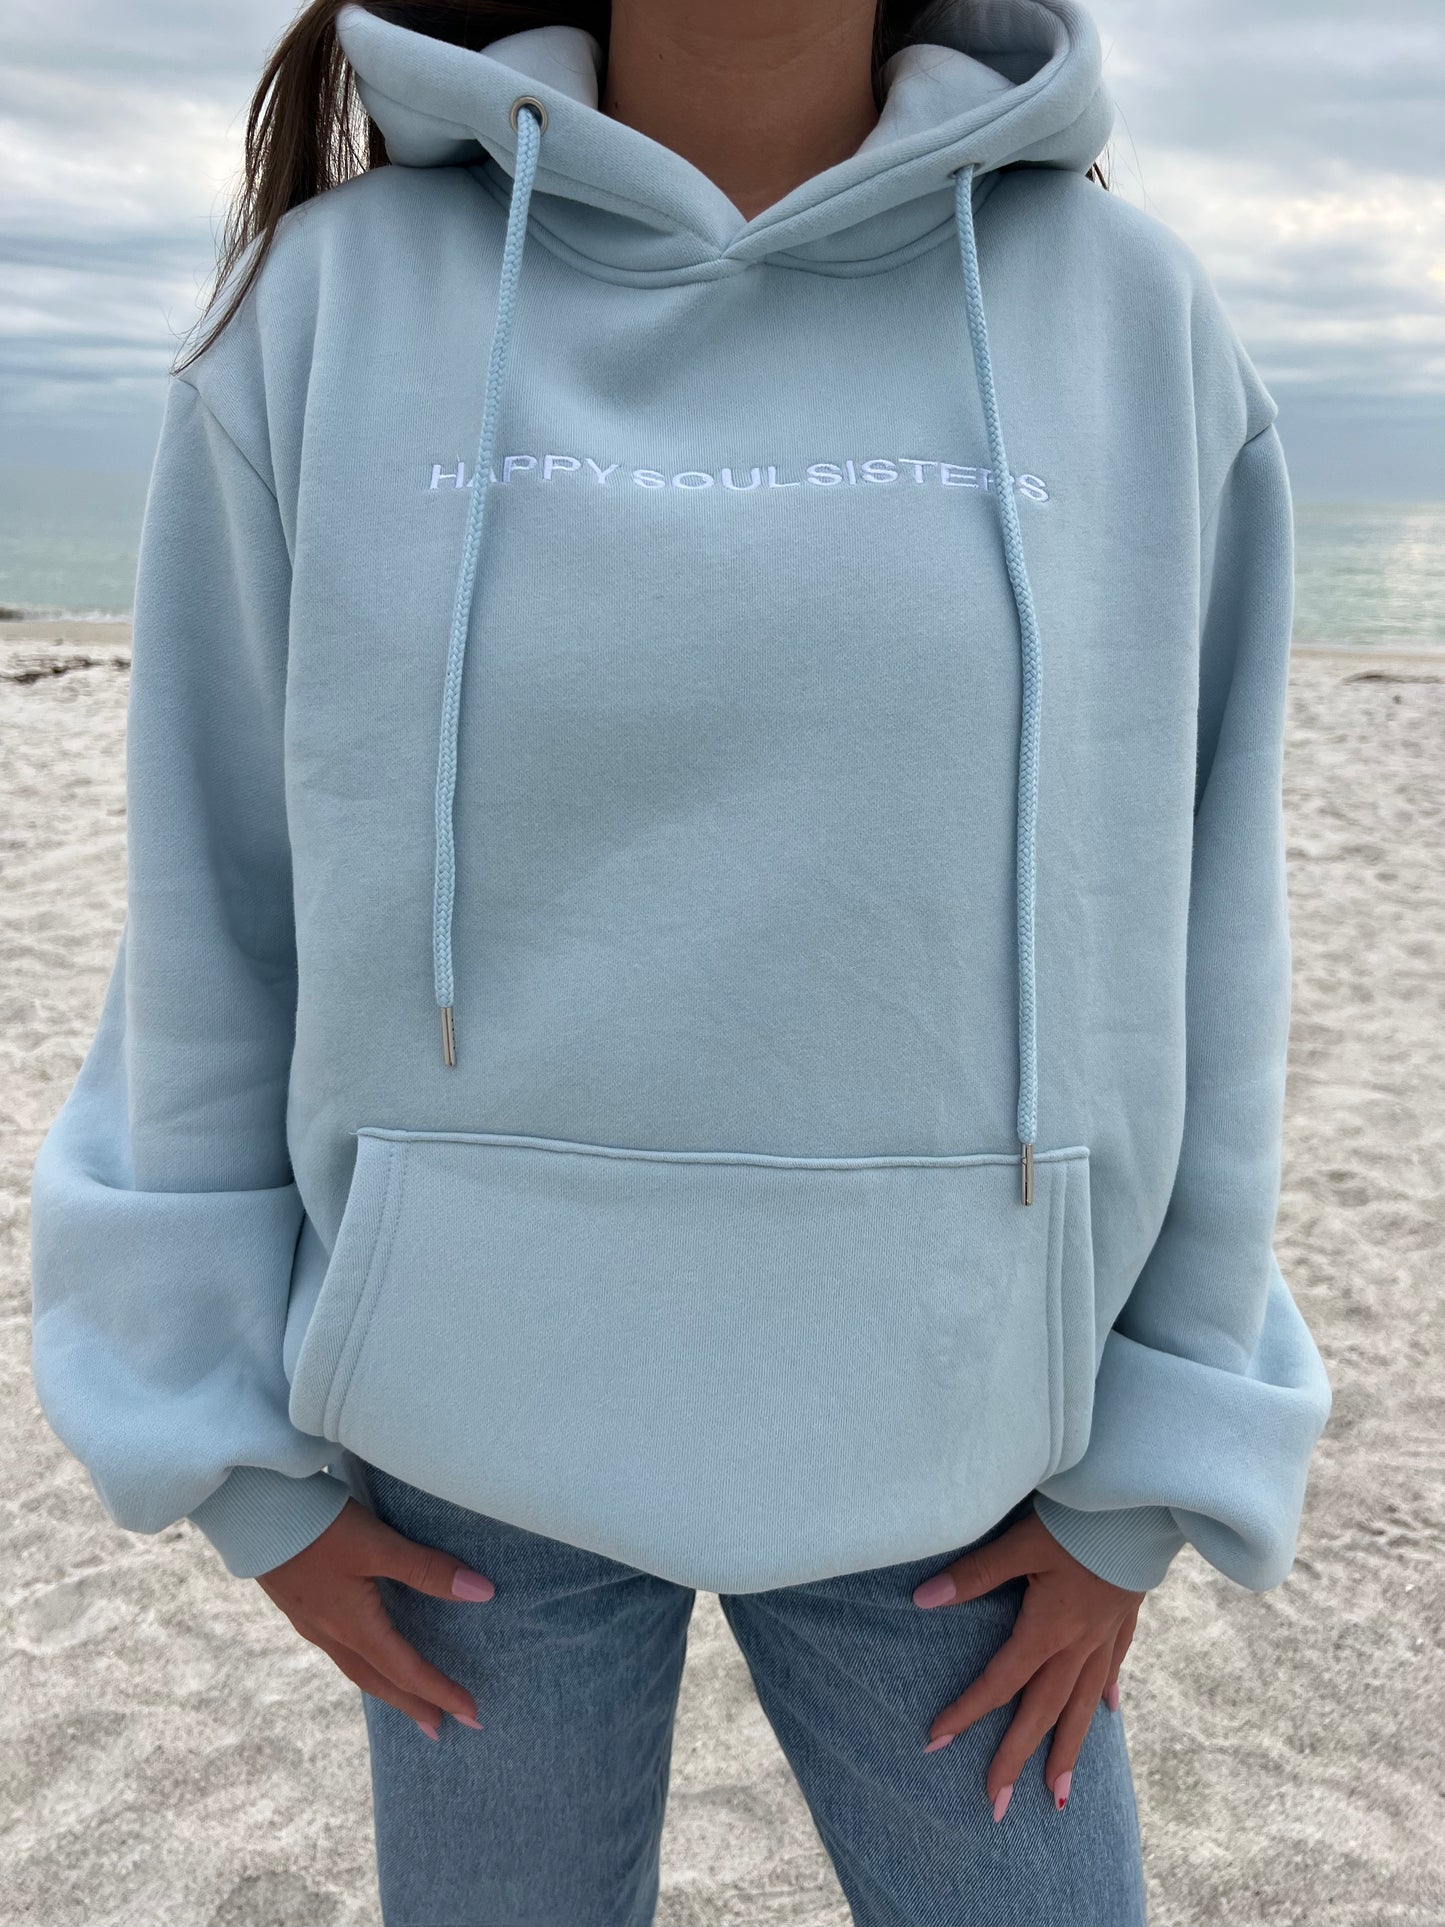 The Signature Happy Soul Sisters Hoodie